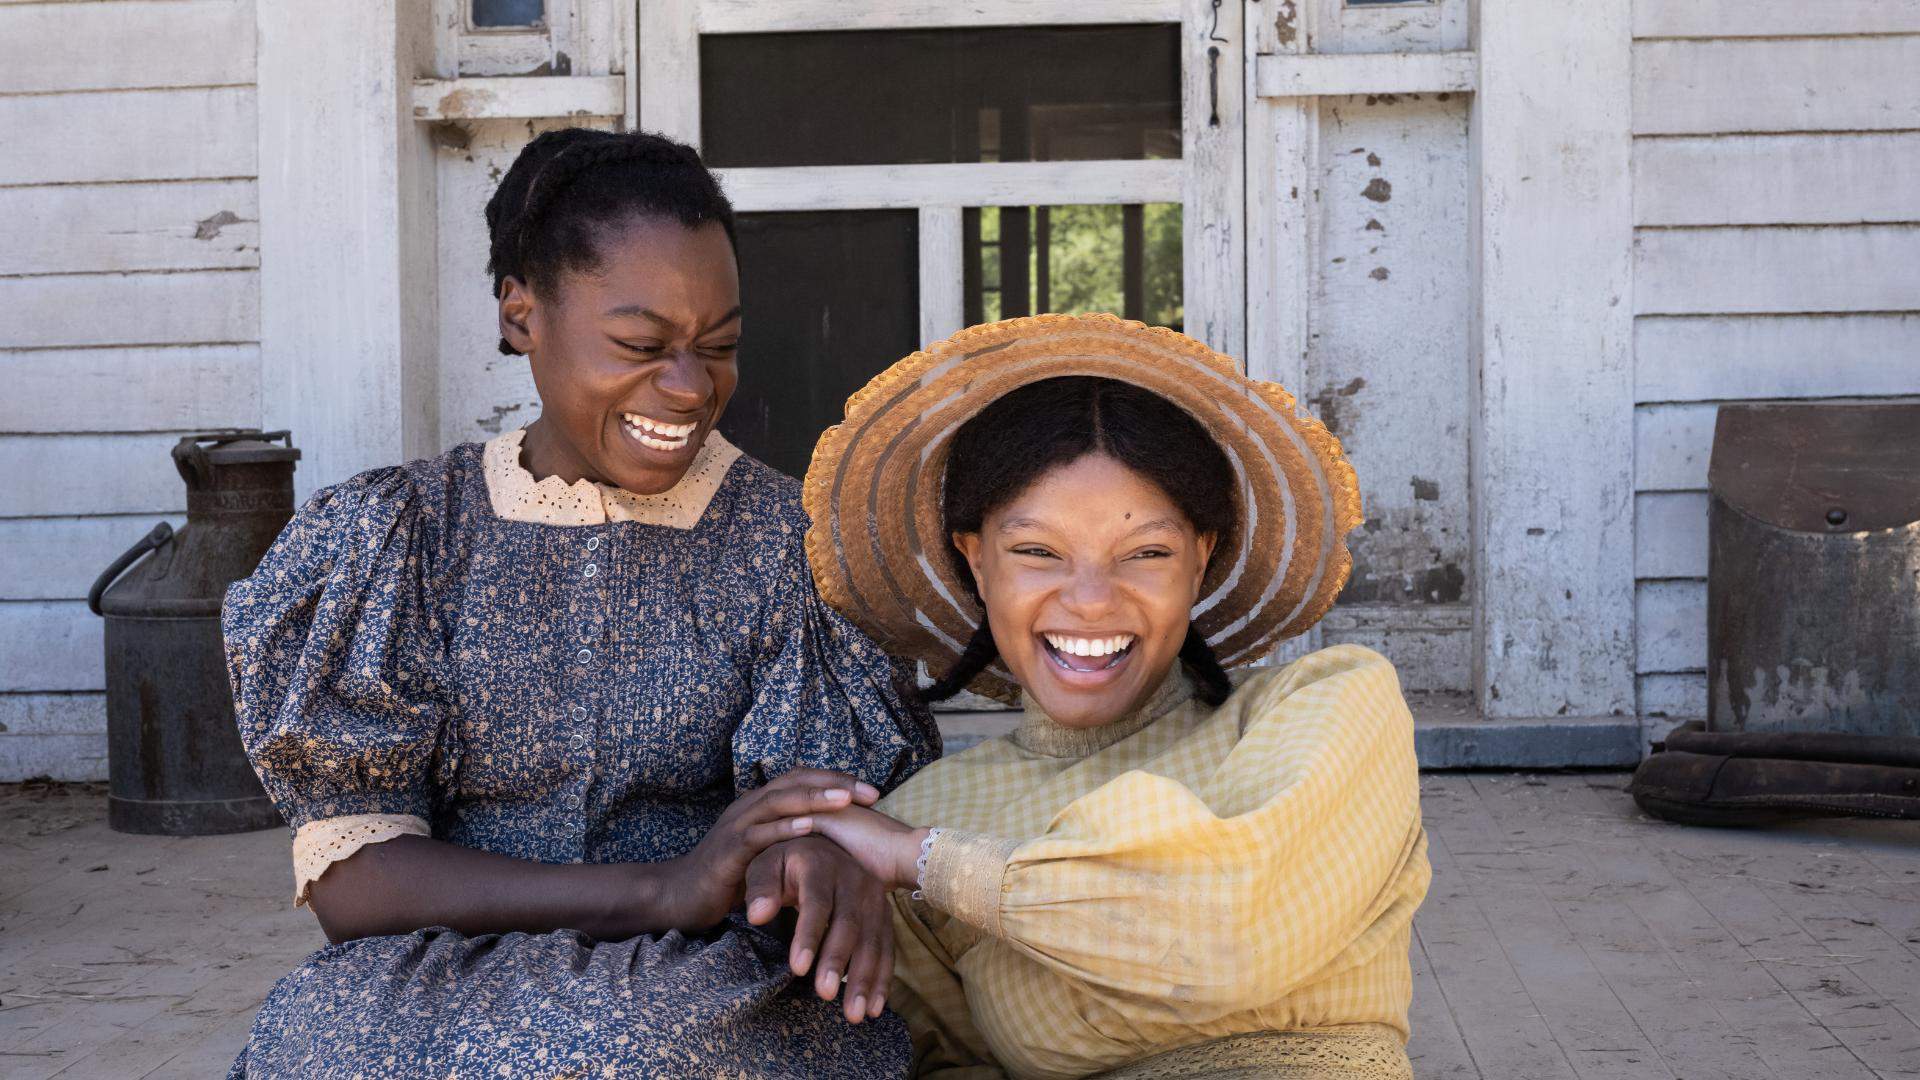 Five Things You Need to Know About the New Film 'The Color Purple'